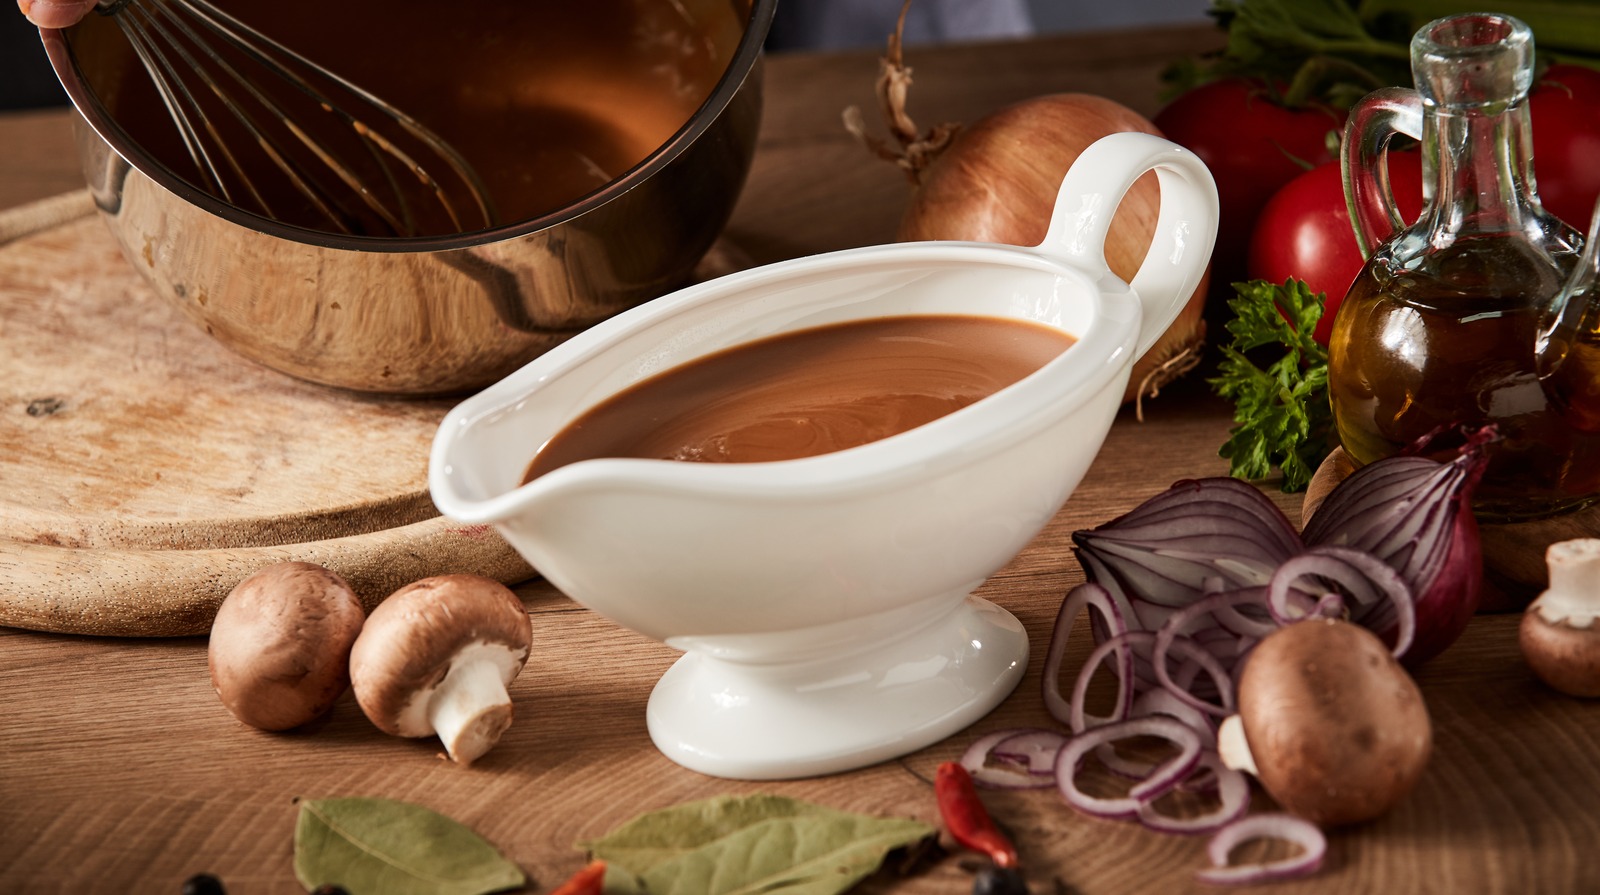 https://www.thedailymeal.com/img/gallery/11-best-gravy-boats-youll-want-to-use-all-year/l-intro-1693581951.jpg